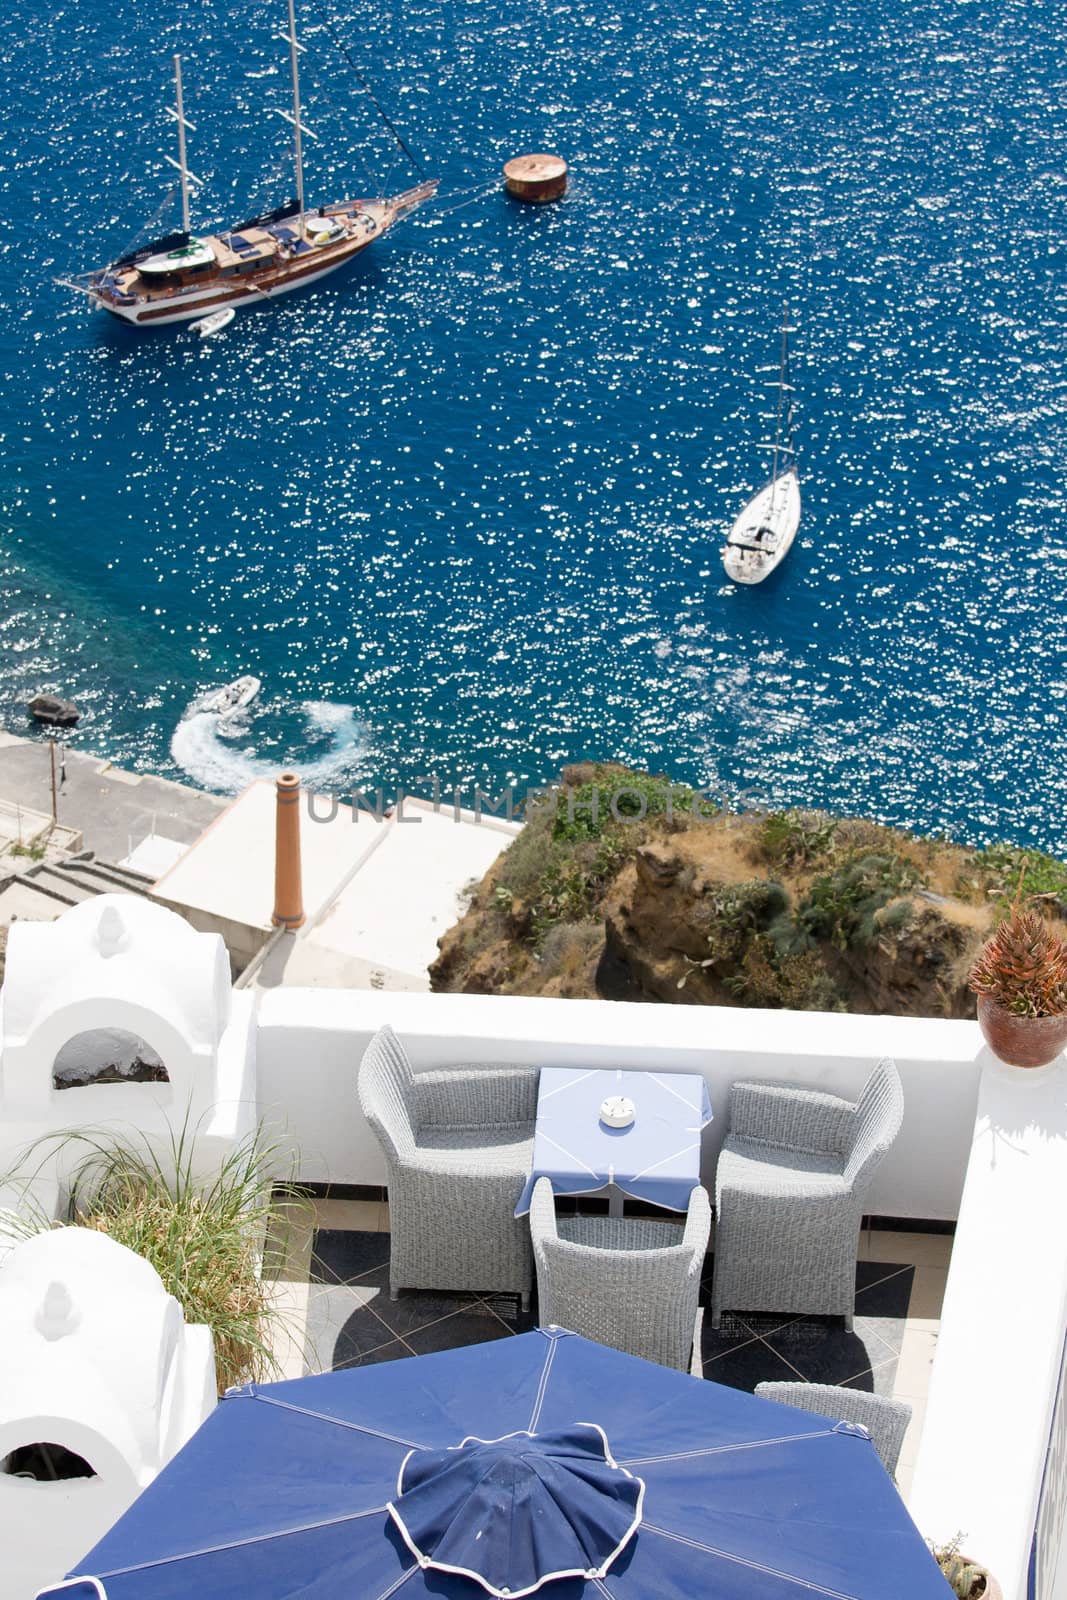 Sea view on moored yacht and sailboat as seen from the restaurant’s terrace on cliff Santorini luxury island, Greece